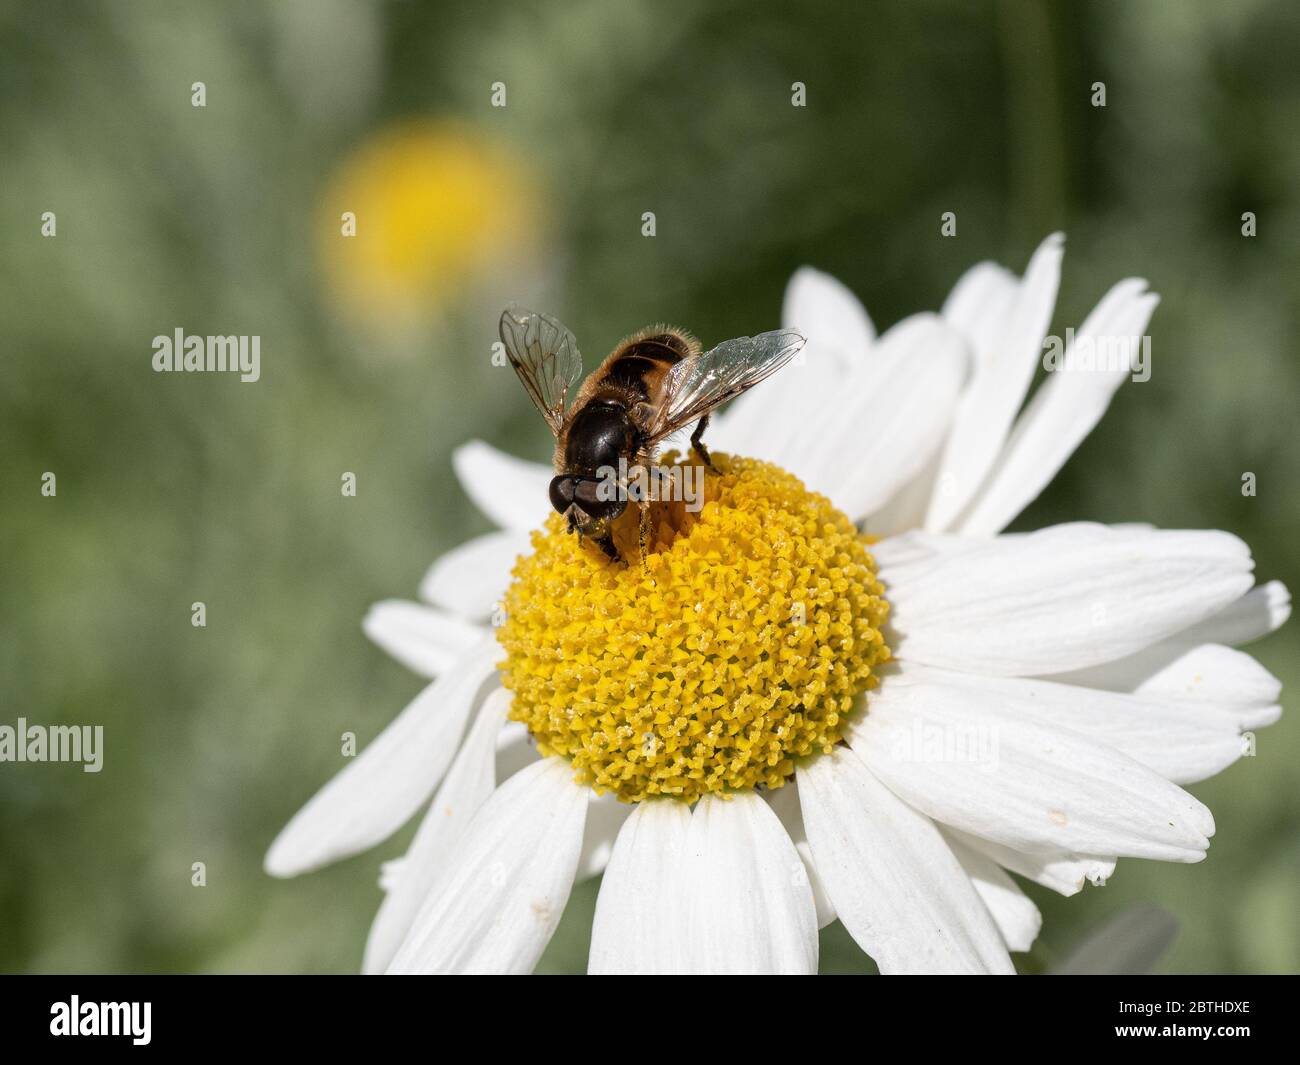 A close up of a bee feeding on a white daisy flower of Anthemis punctata subsp. cupaniana Stock Photo